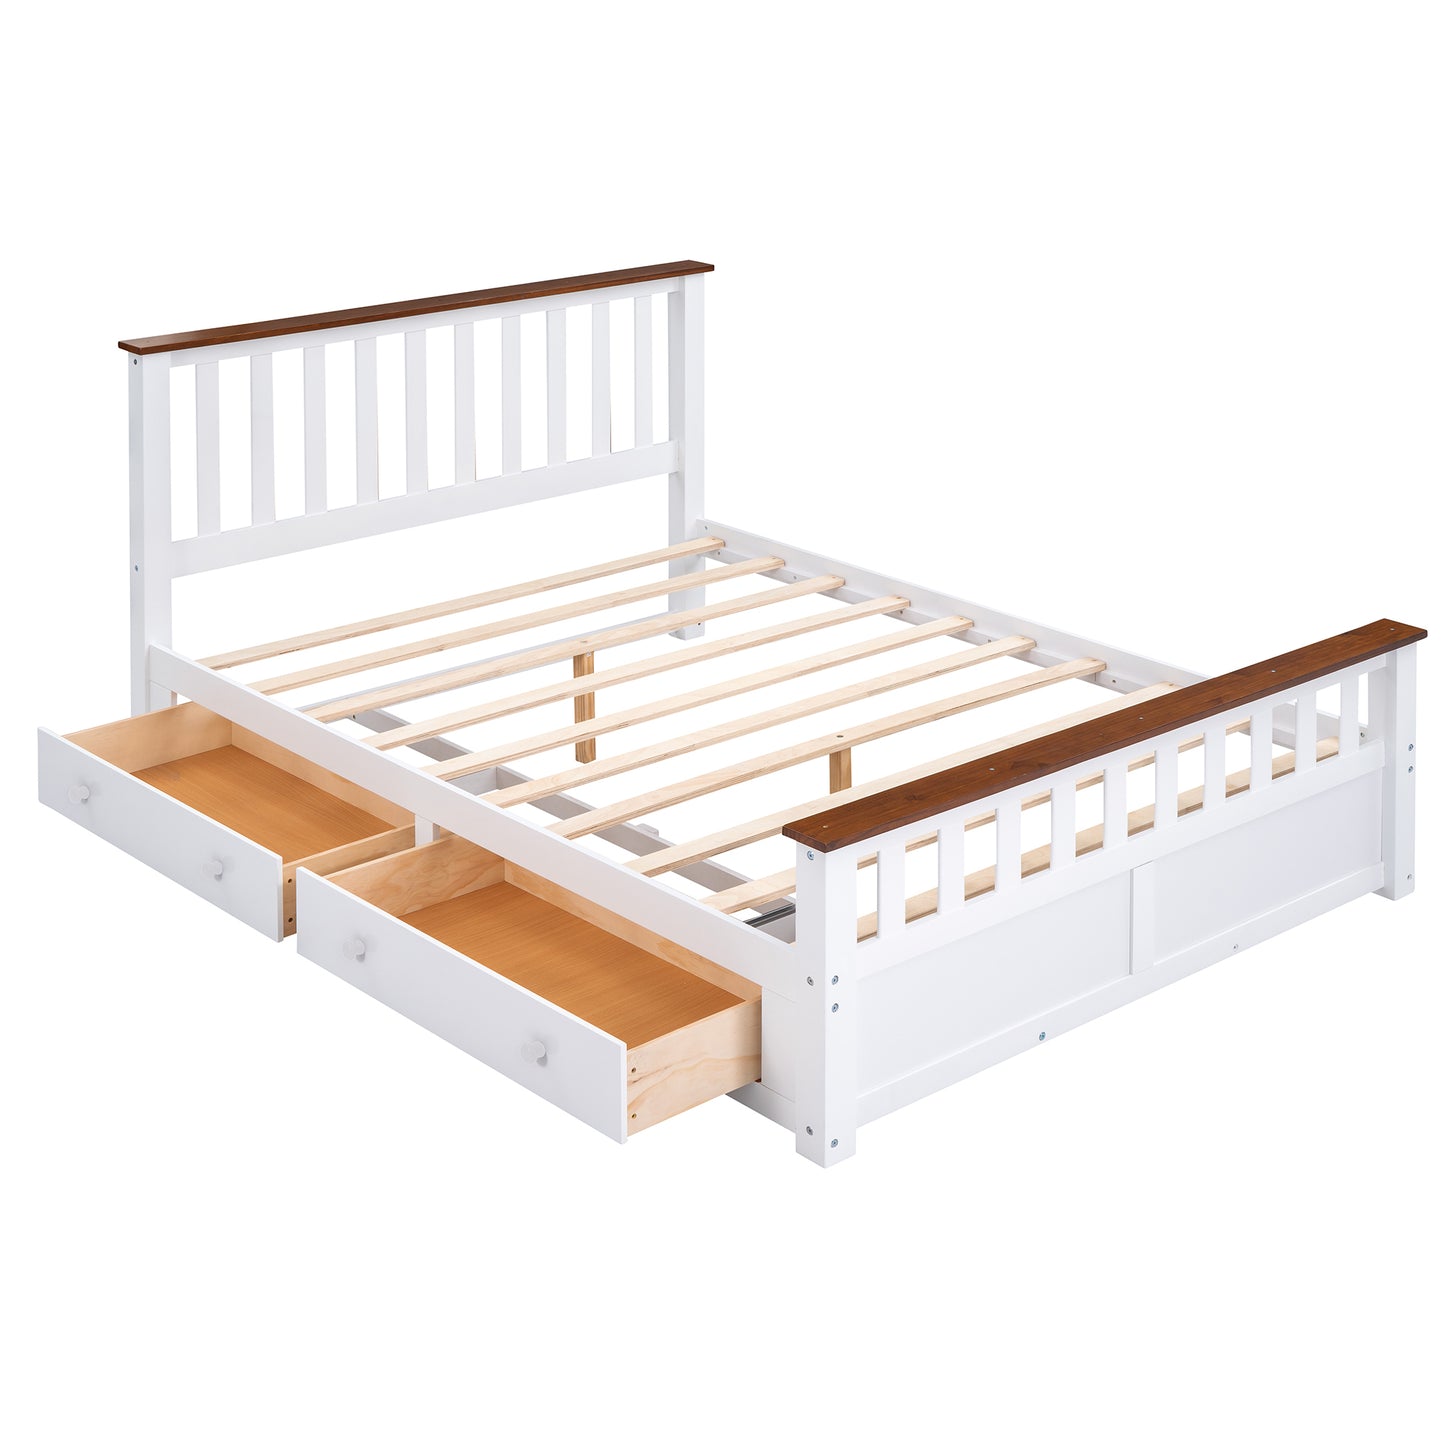 3-Pieces Bedroom Sets Queen Size Platform Bed with Two Nightstands(USB Charging Ports),White+Walnut